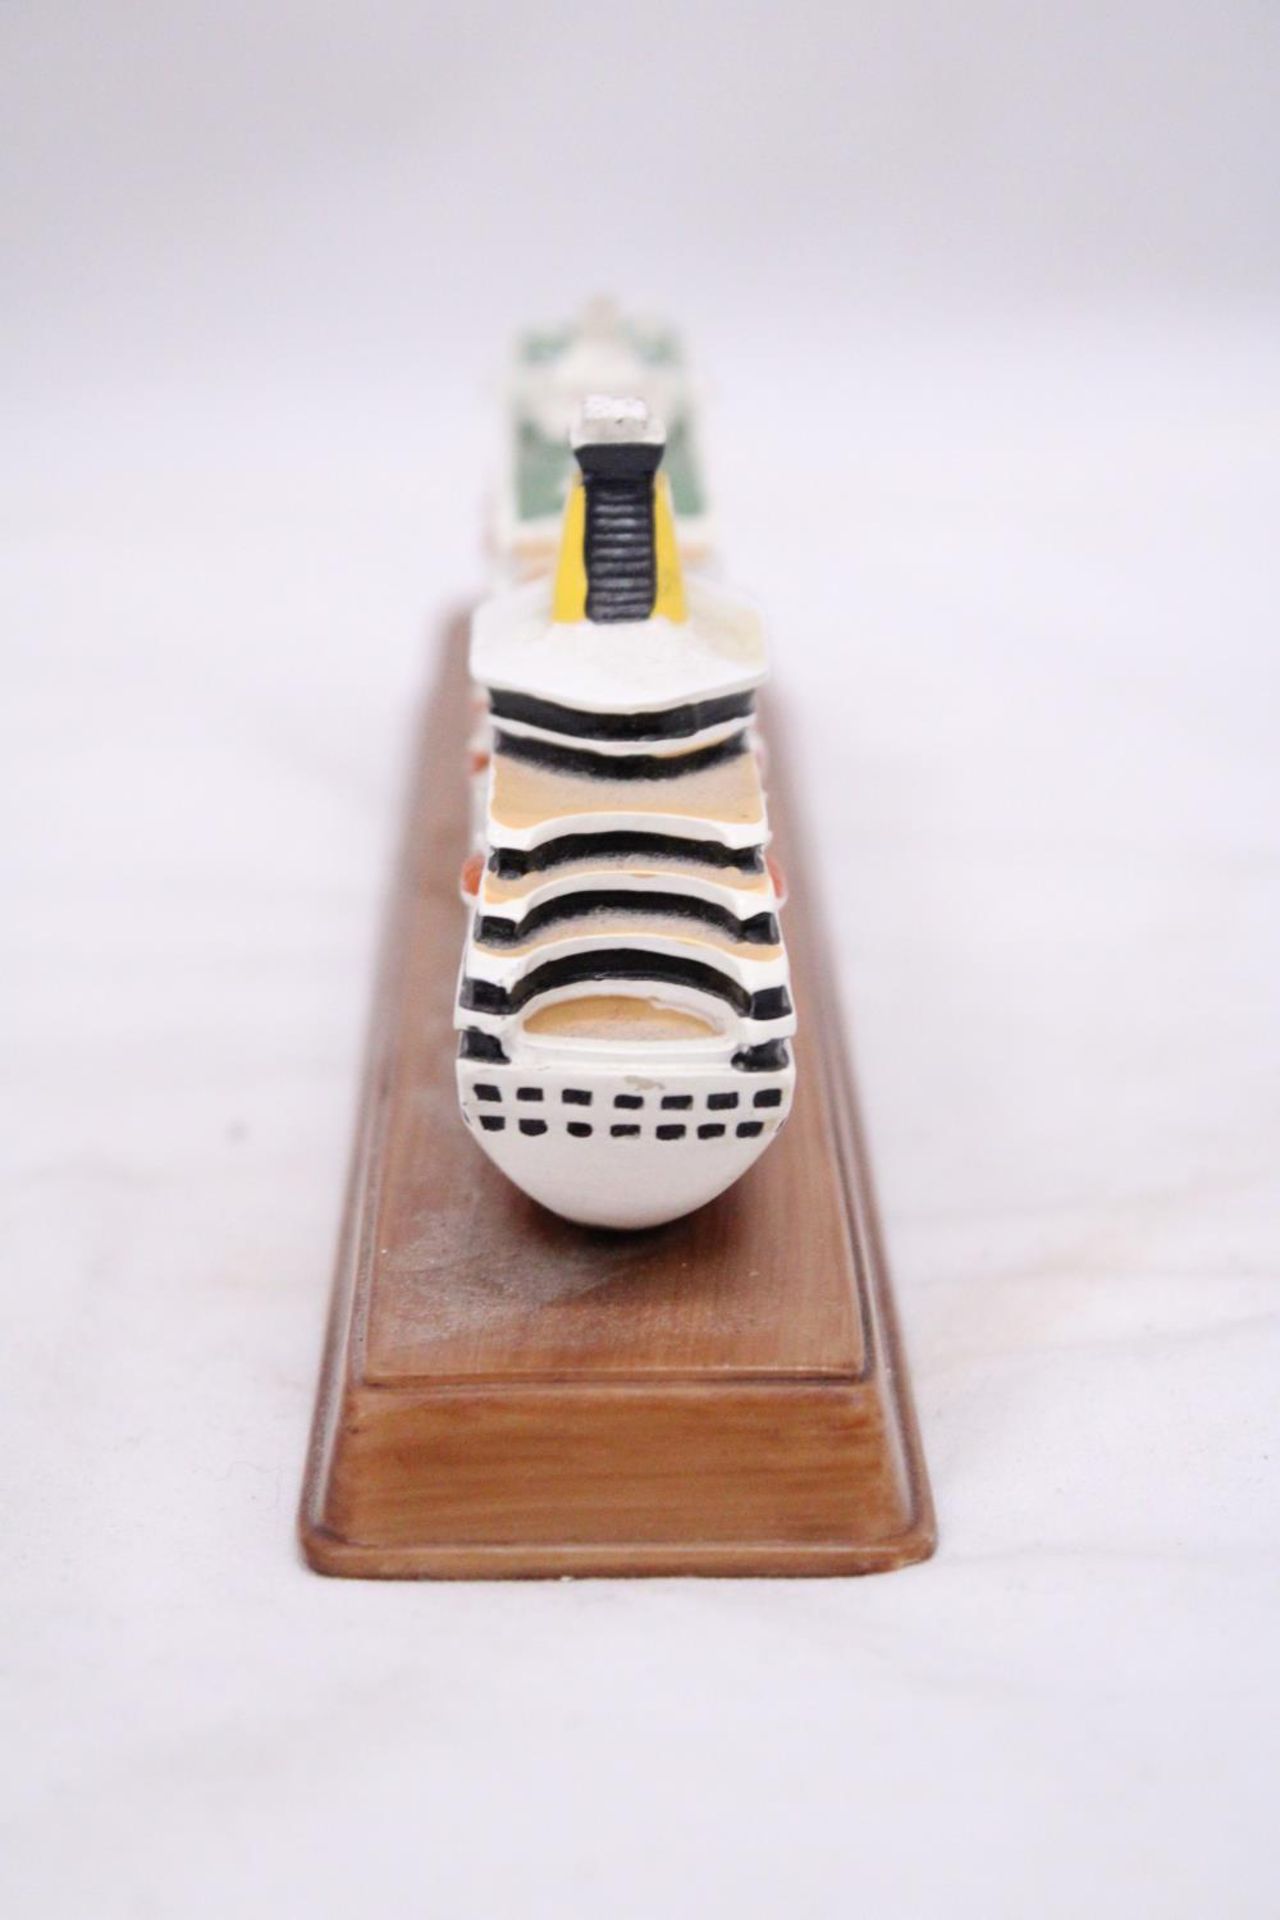 A HEAVY SOLID OCEAN LINER ON WOODEN STAND (ARTEMIS), LENGTH 26CM, HEIGHT 6CM - Image 5 of 6